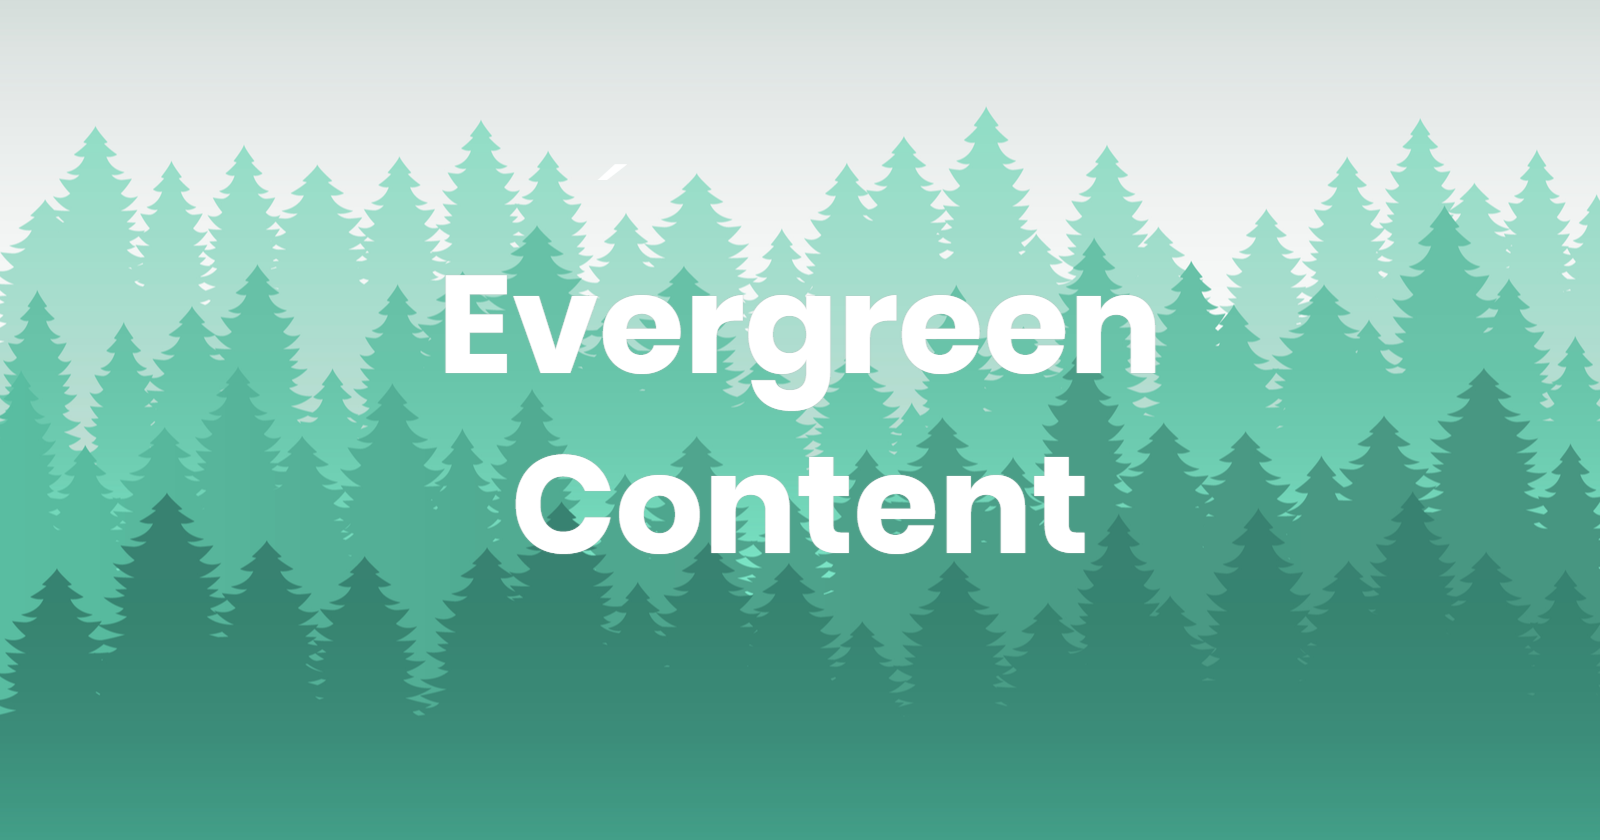 What Is Evergreen Content & Why Should You Care